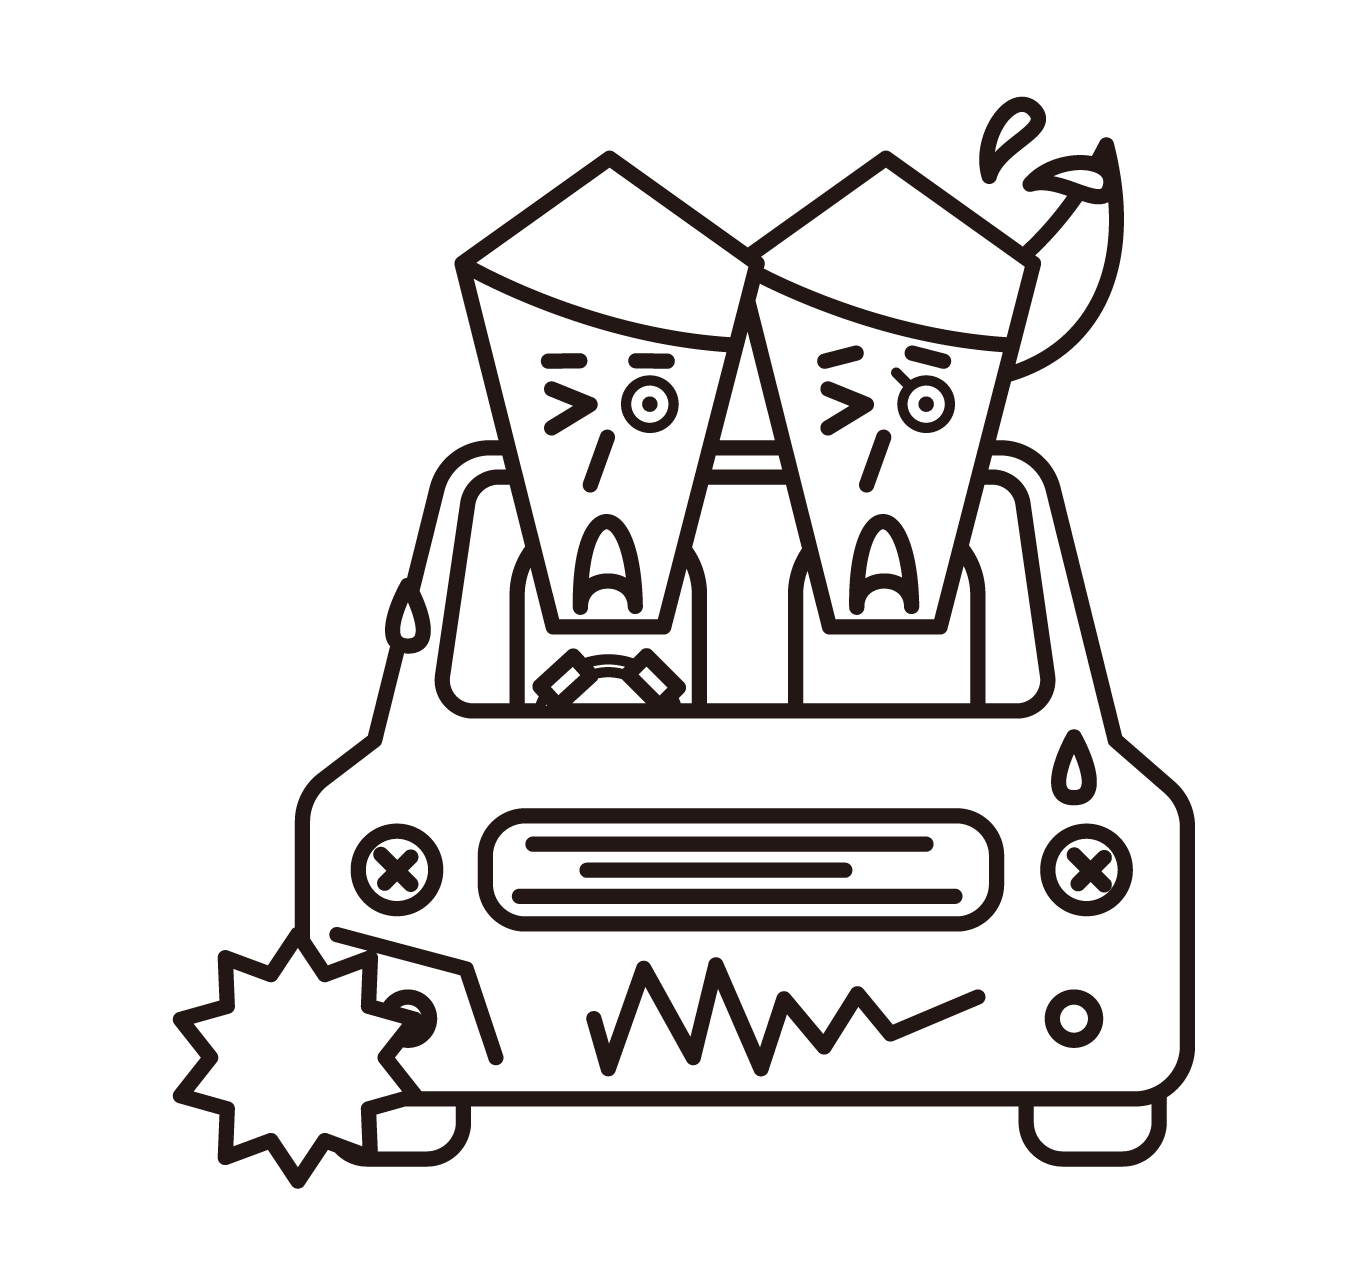 Illustration of a couple who have a traffic accident